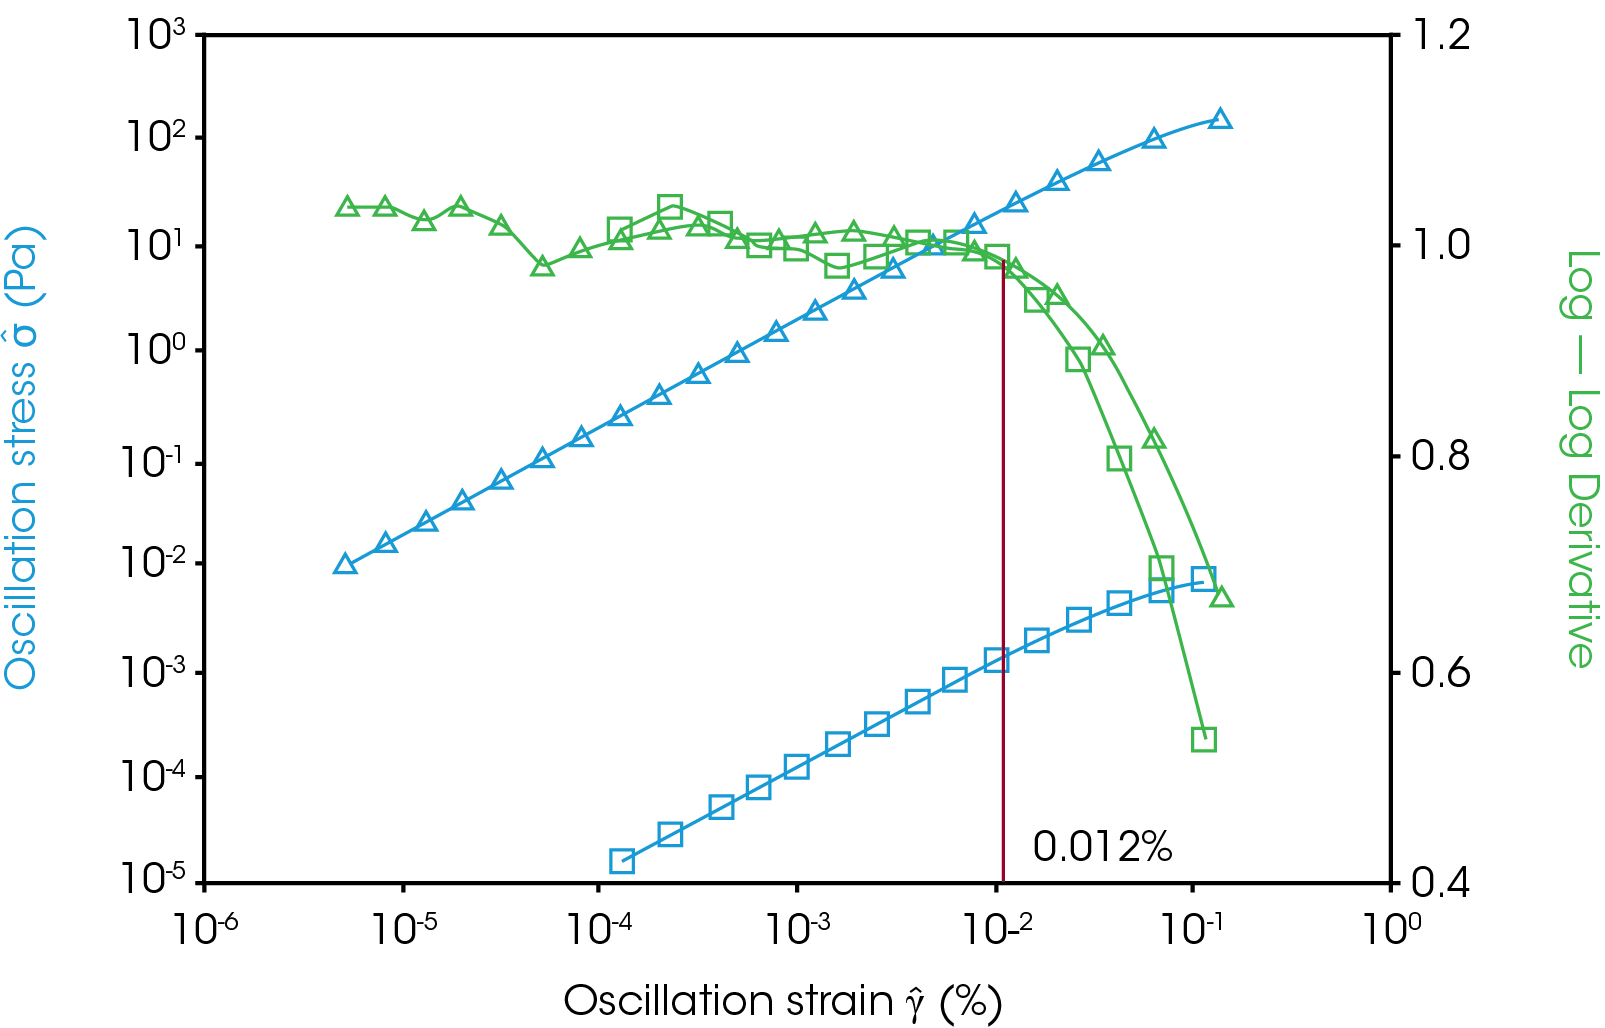 Figure 4. Amplitude sweep of milk chocolate at 10 Hz and 10 ˚C (triangles) and 50 ˚C (squares). Stress is indicated in blue and the derivative of the log-stress log-strain curve in green. The critical strain is indicated at the red line.